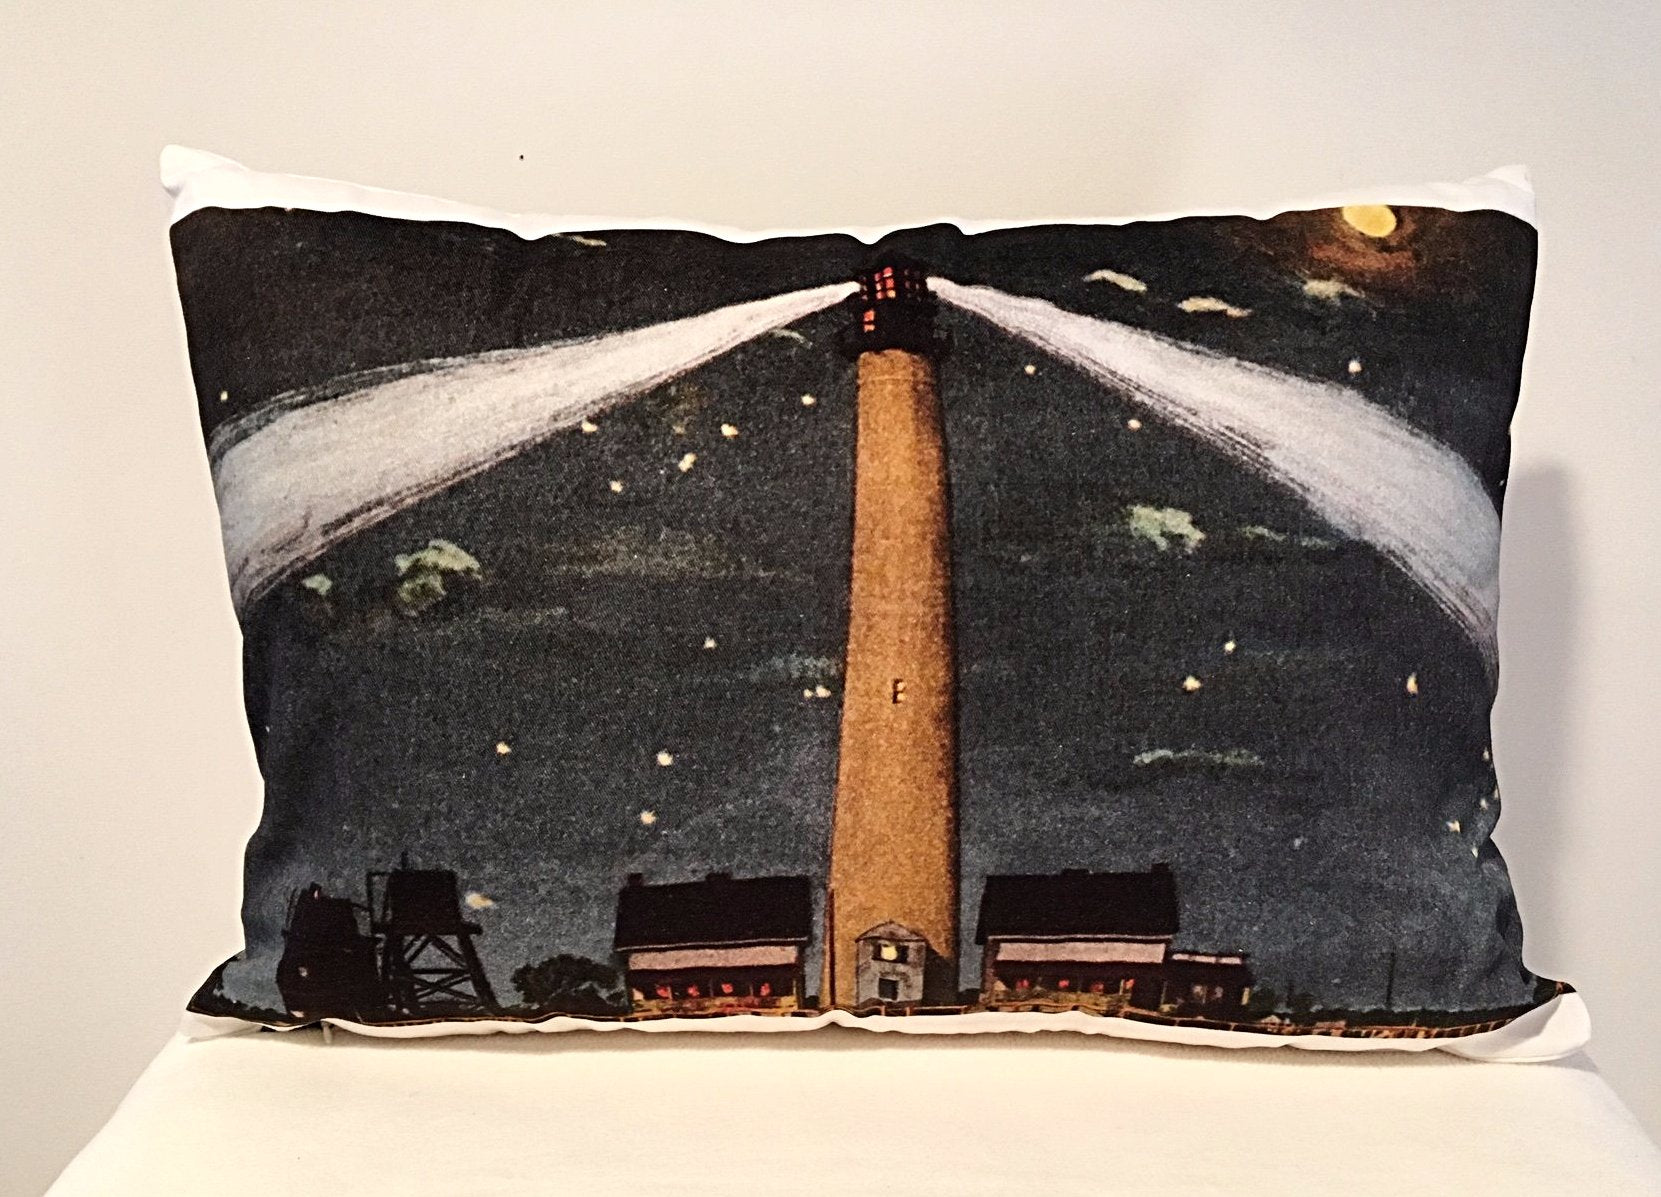 Cape May Lighthouse Day & Night Two-Sided Pillow - That Fabled Shore Home Decor